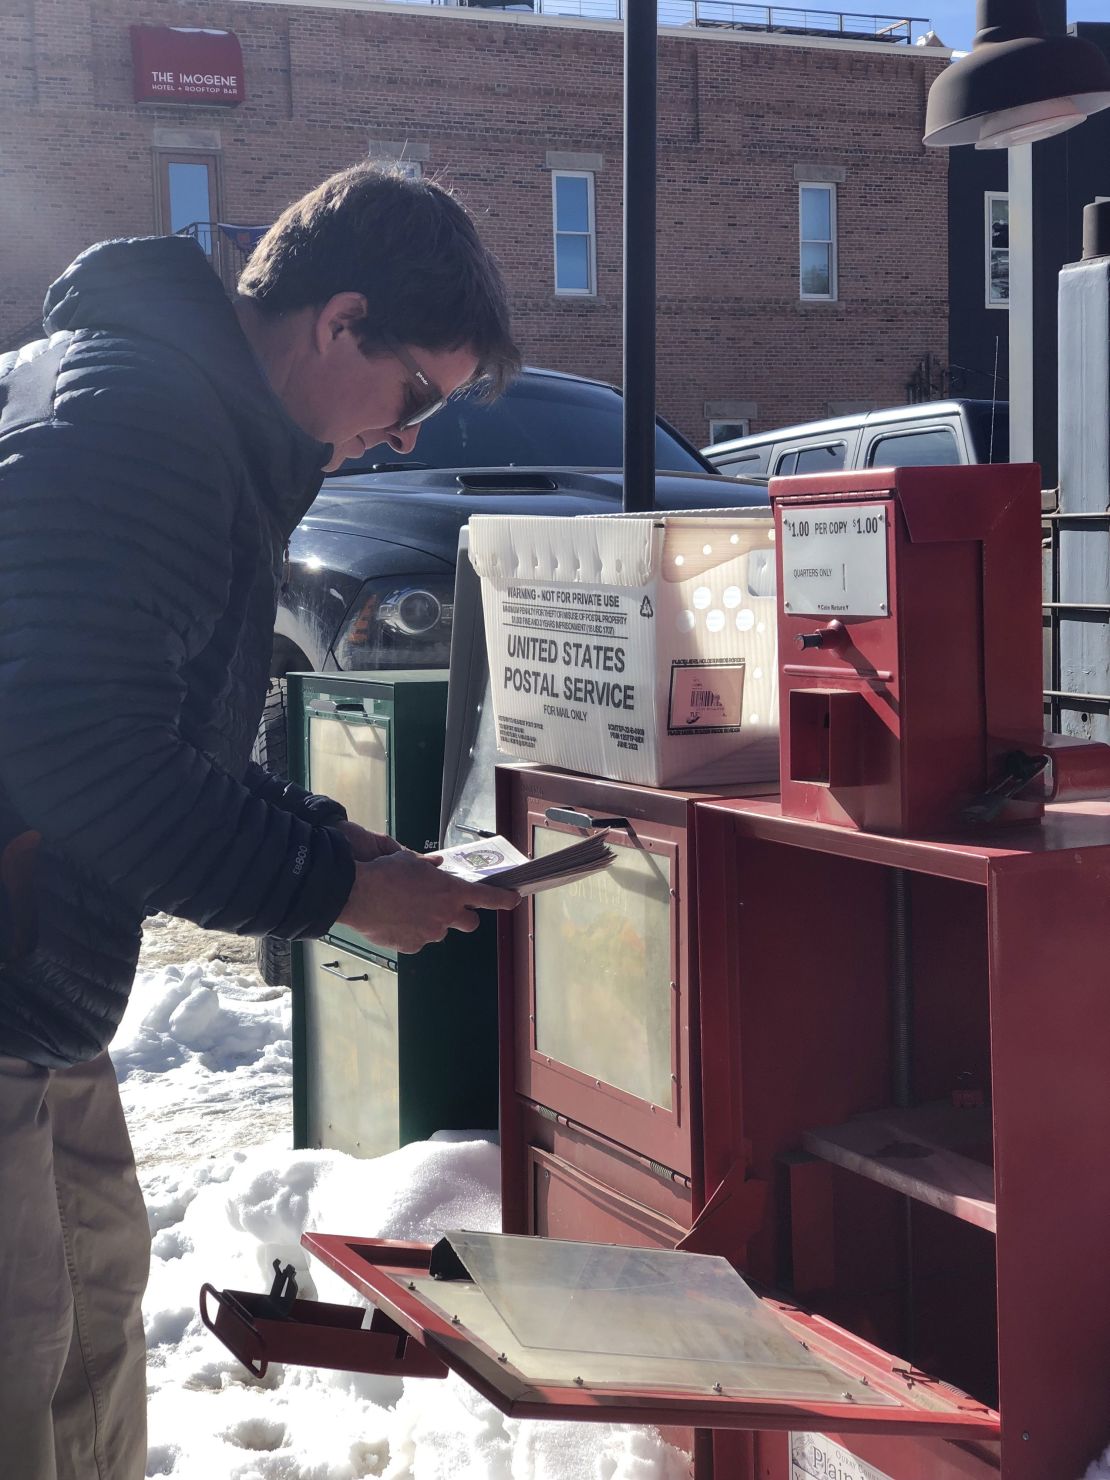 Co-publisher, Mike Wiggins, stocks newspaper racks with re-printed copies.